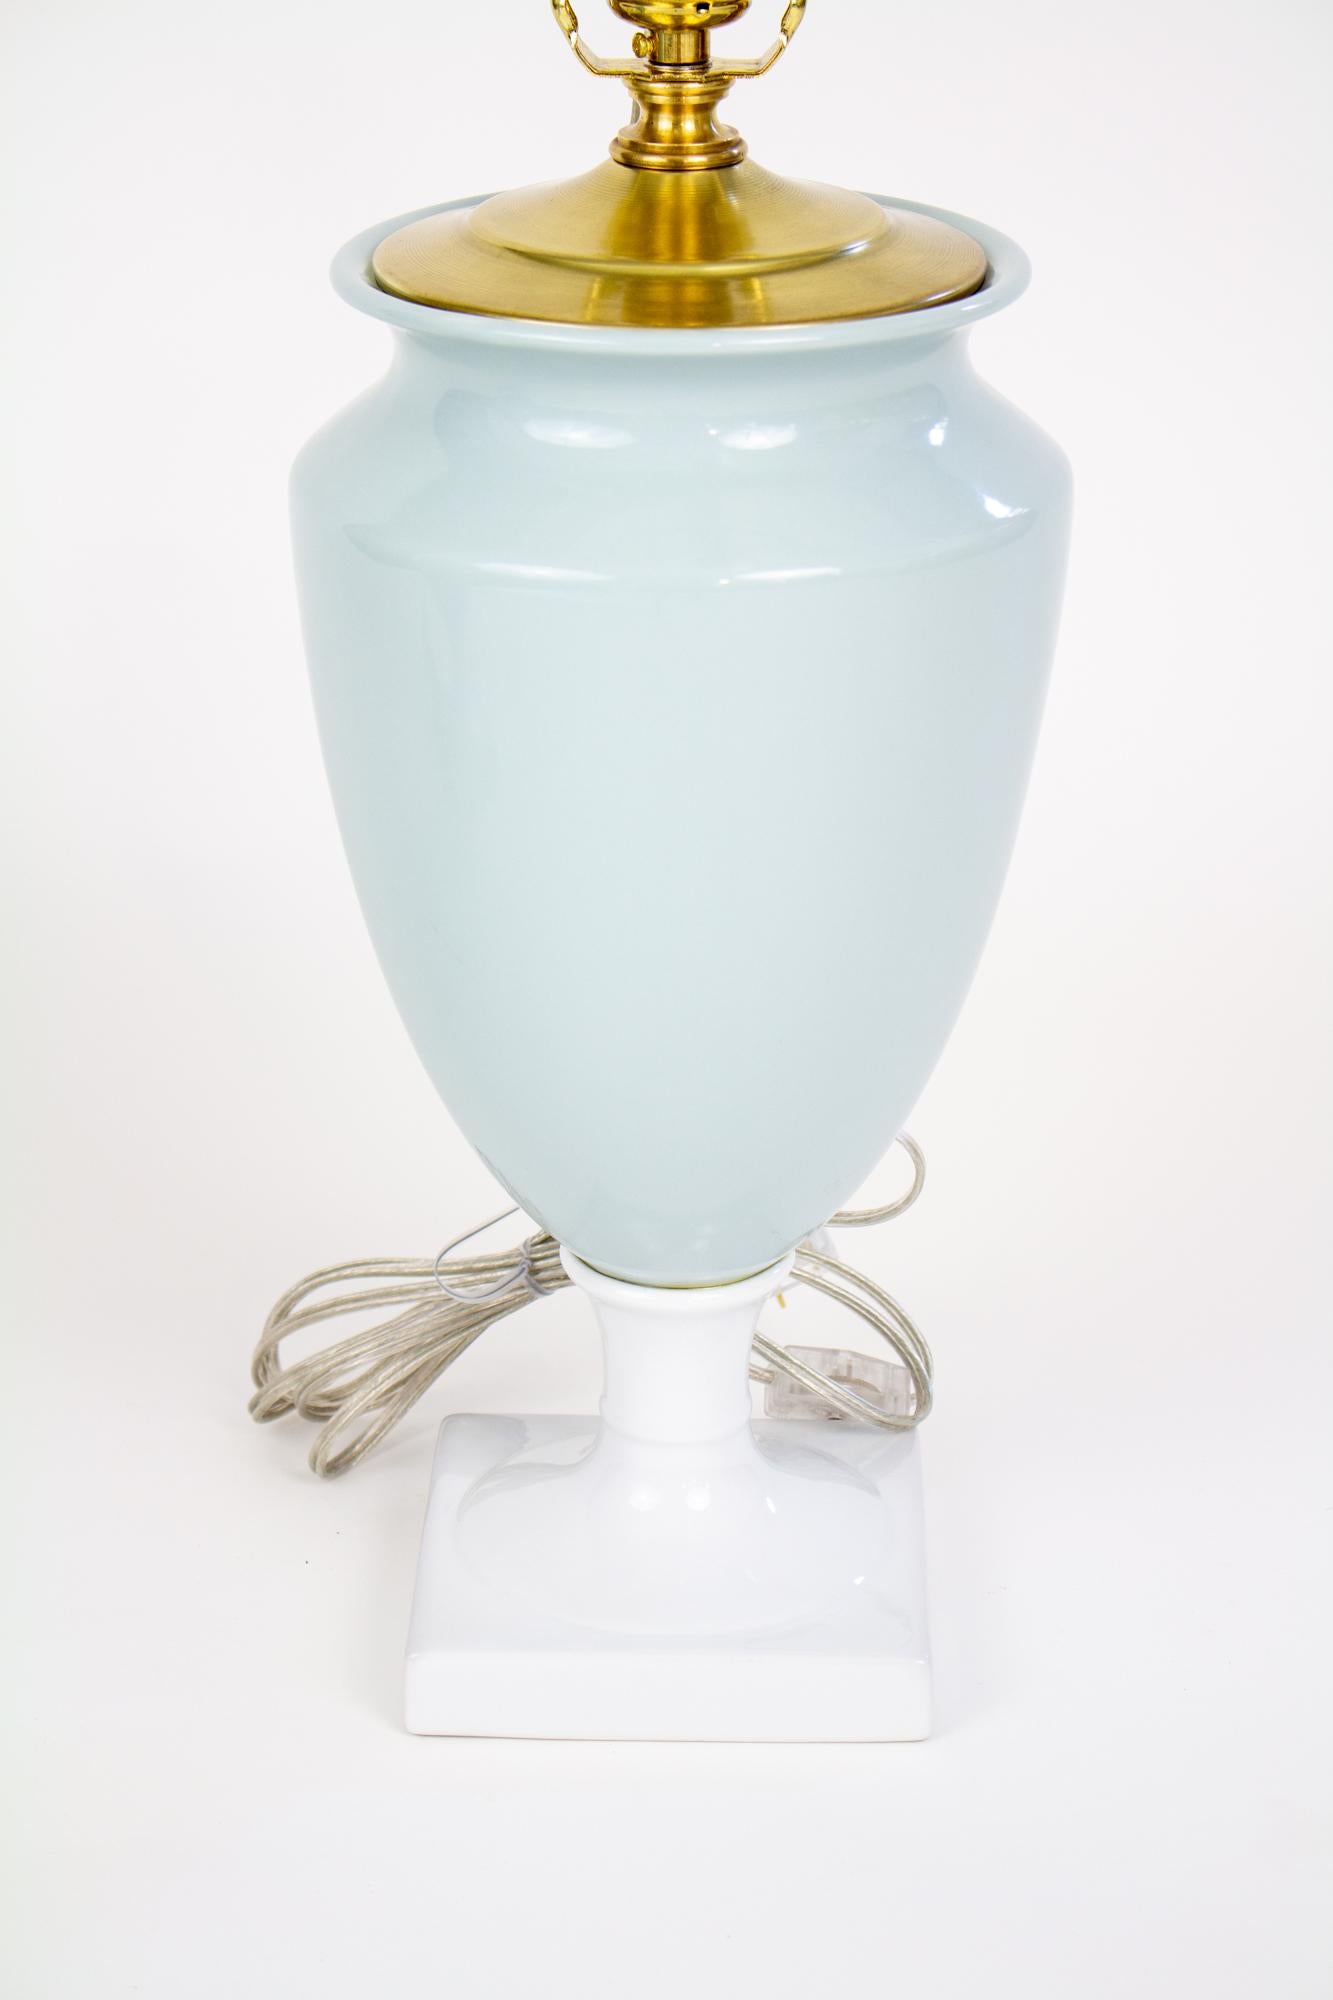 Late 20th Century Celadon and White Porcelain Urn Table Lamps - a Pair For Sale 1